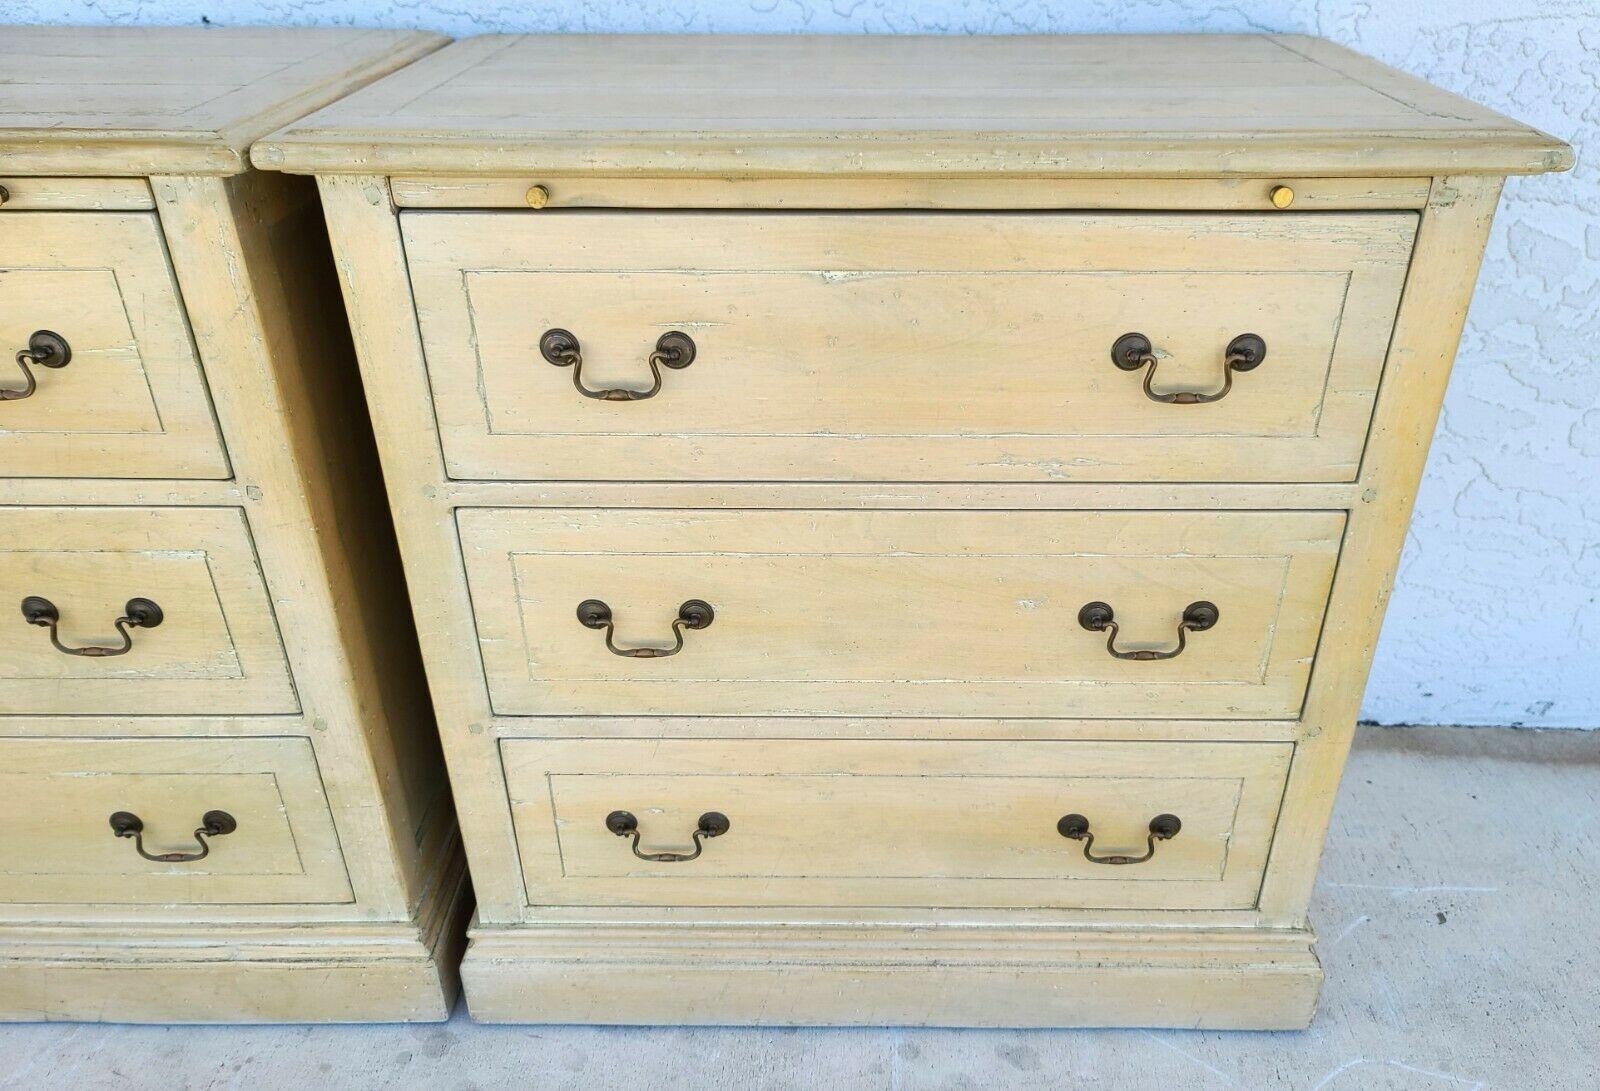 Offering One Of Our Recent Palm Beach Estate Fine Furniture Acquisitions of A Pair of Melrose Collection distressed solid wood nightstands by Guy Chaddock
Featuring 3 drawers and pull-out serving extensions.

Coloration:
The finish is original and